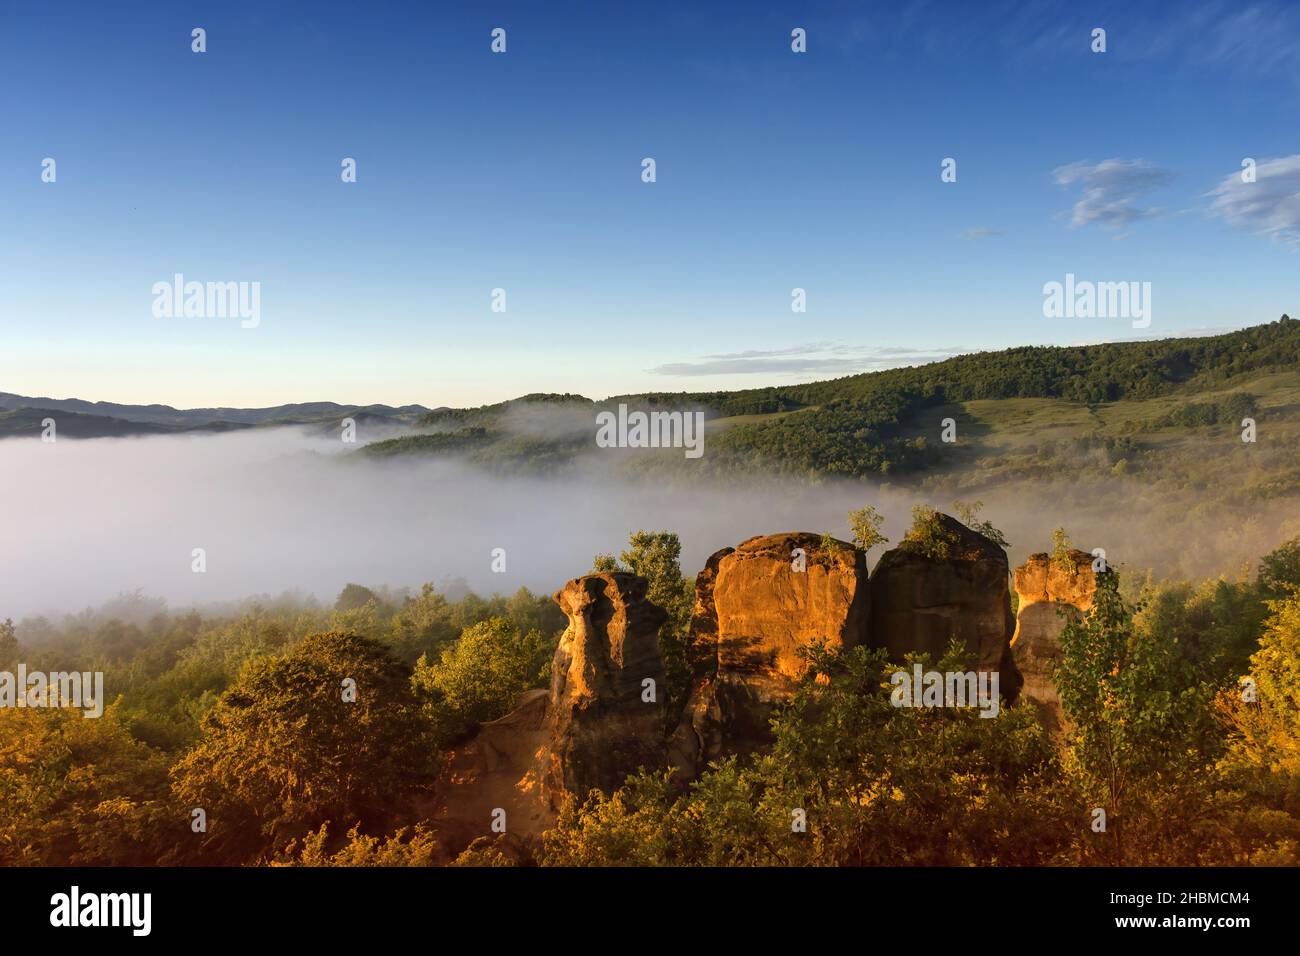 The rock towers of the Dragons Garden (Gradina Zmeilor ), a protected geological nature reserve in Salaj, Transylvania region, Romania, at sunrise Stock Photo